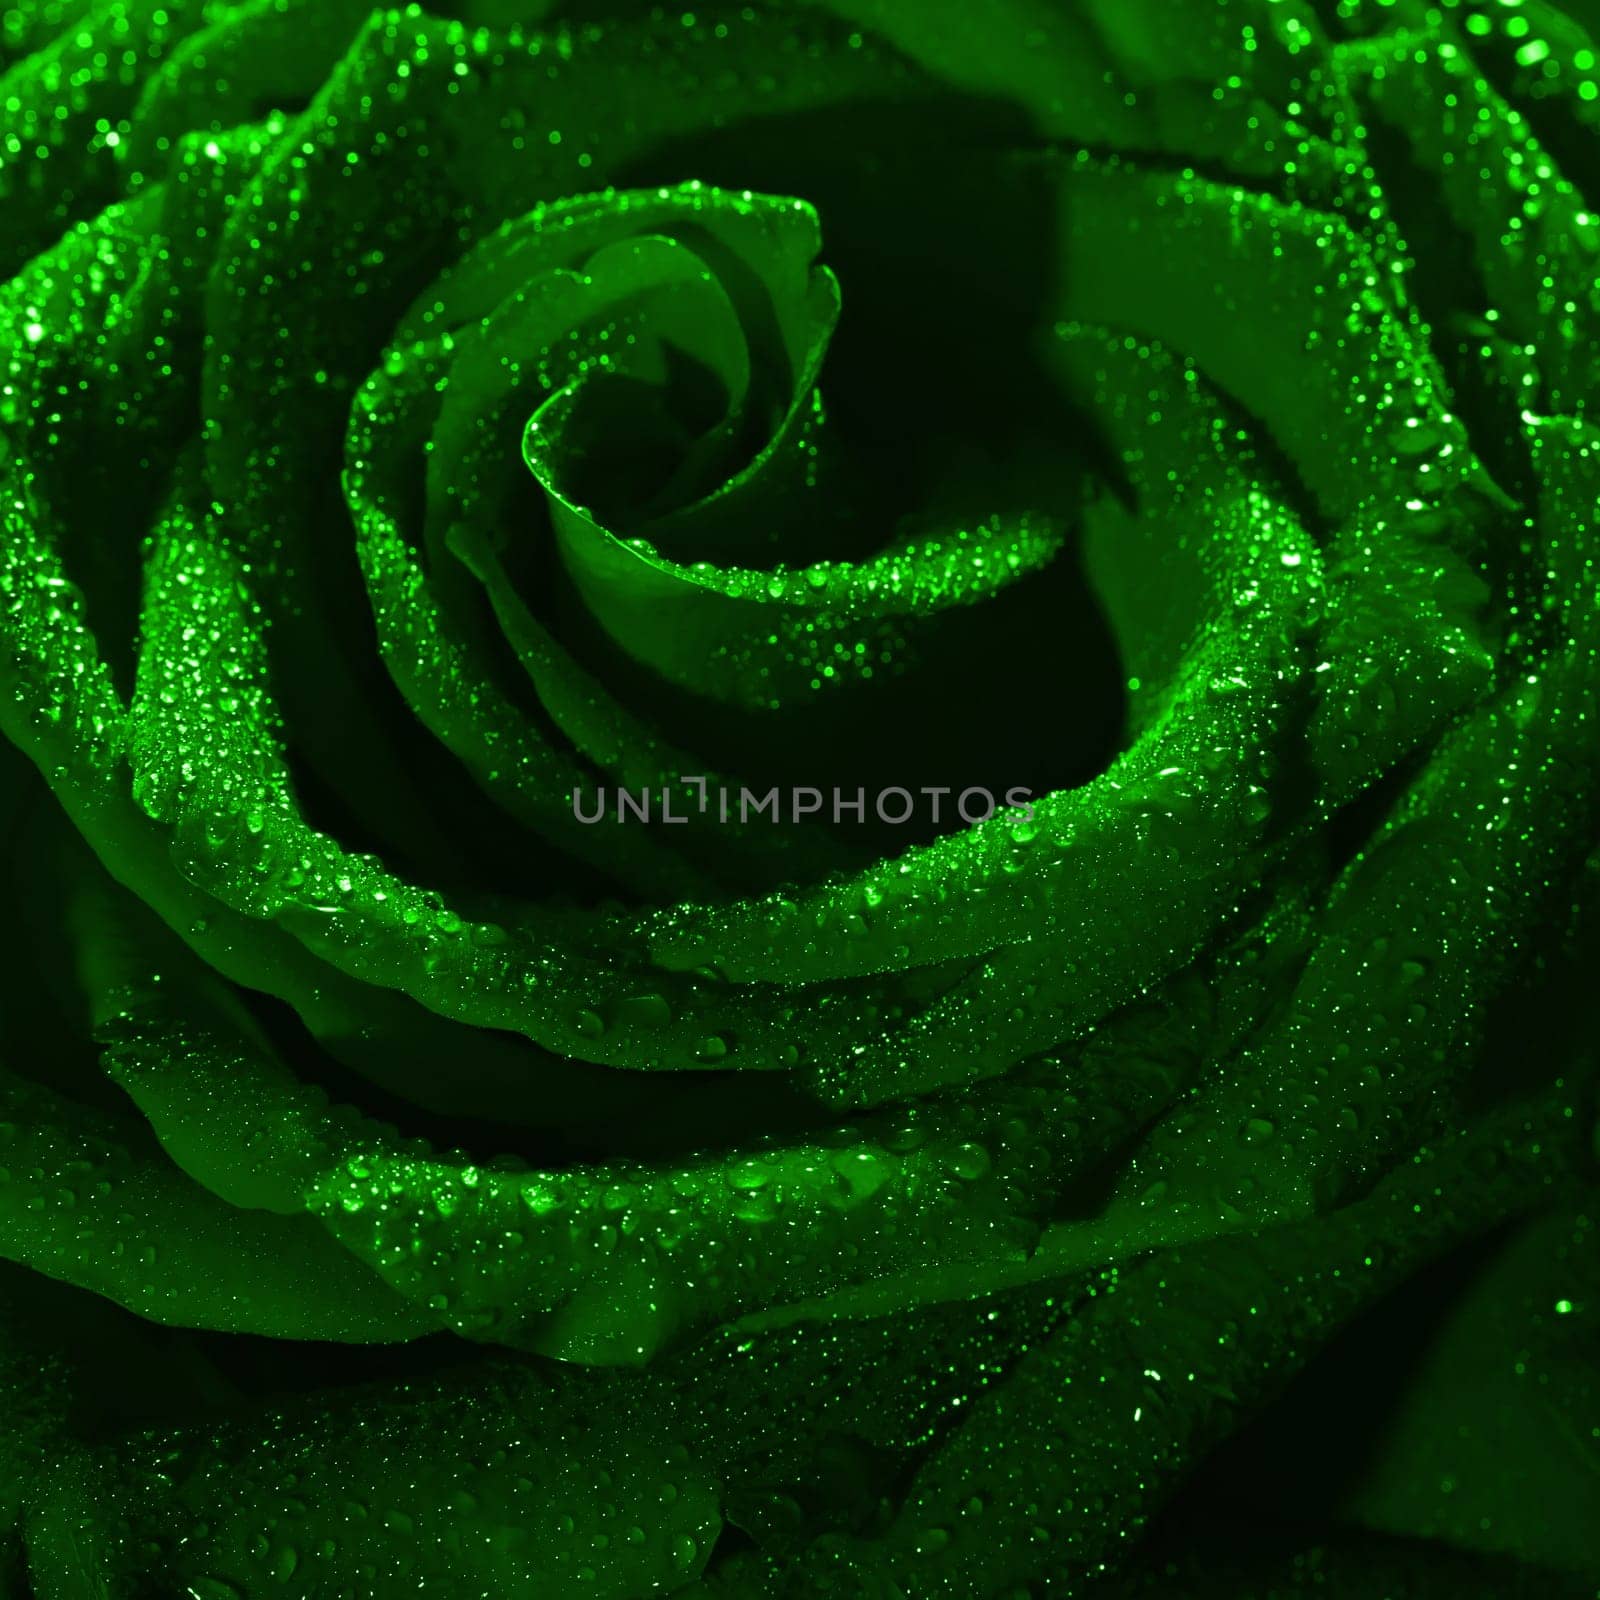 Blooming green rose bud in water drops close-up on a black background, use as background, wallpaper, greeting card